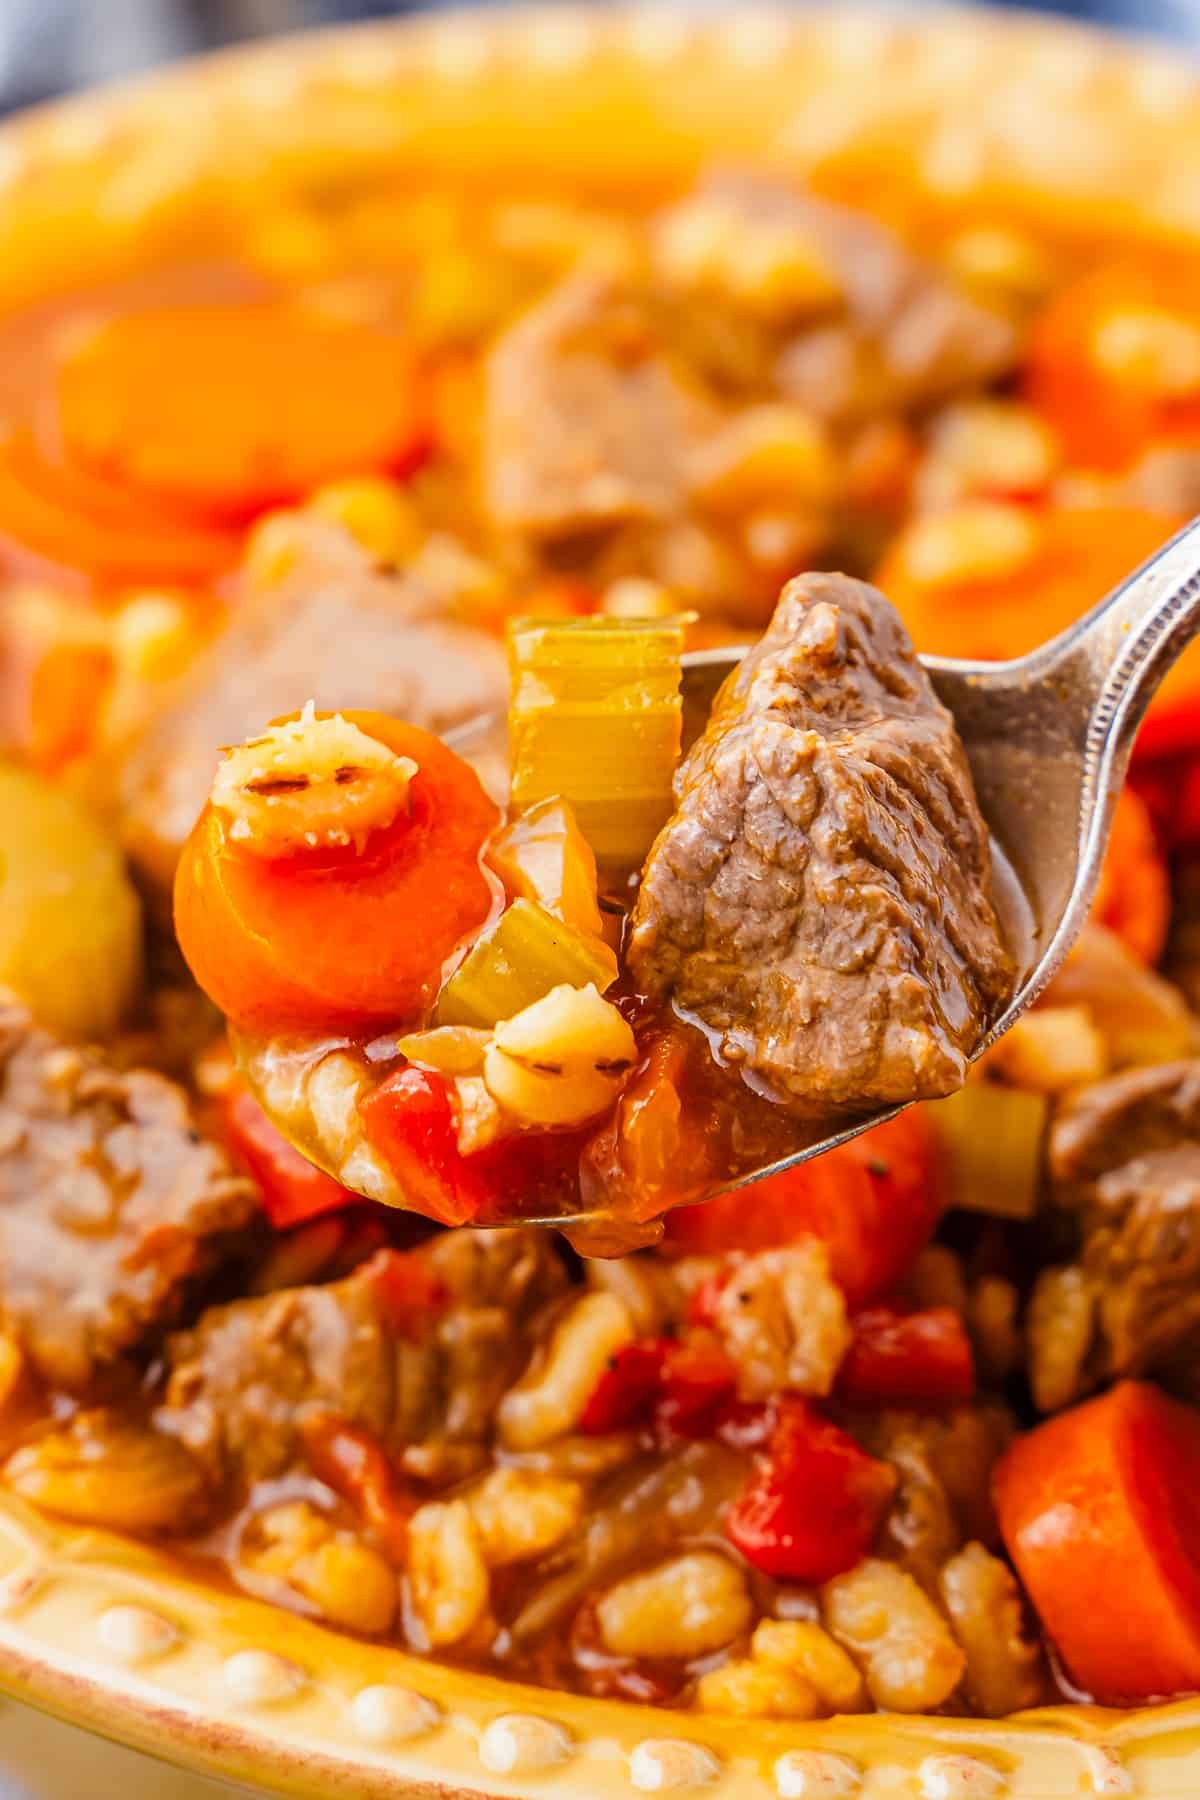 up close image of a spoon grabbing a portion of Beef and Barley Soup Recipe